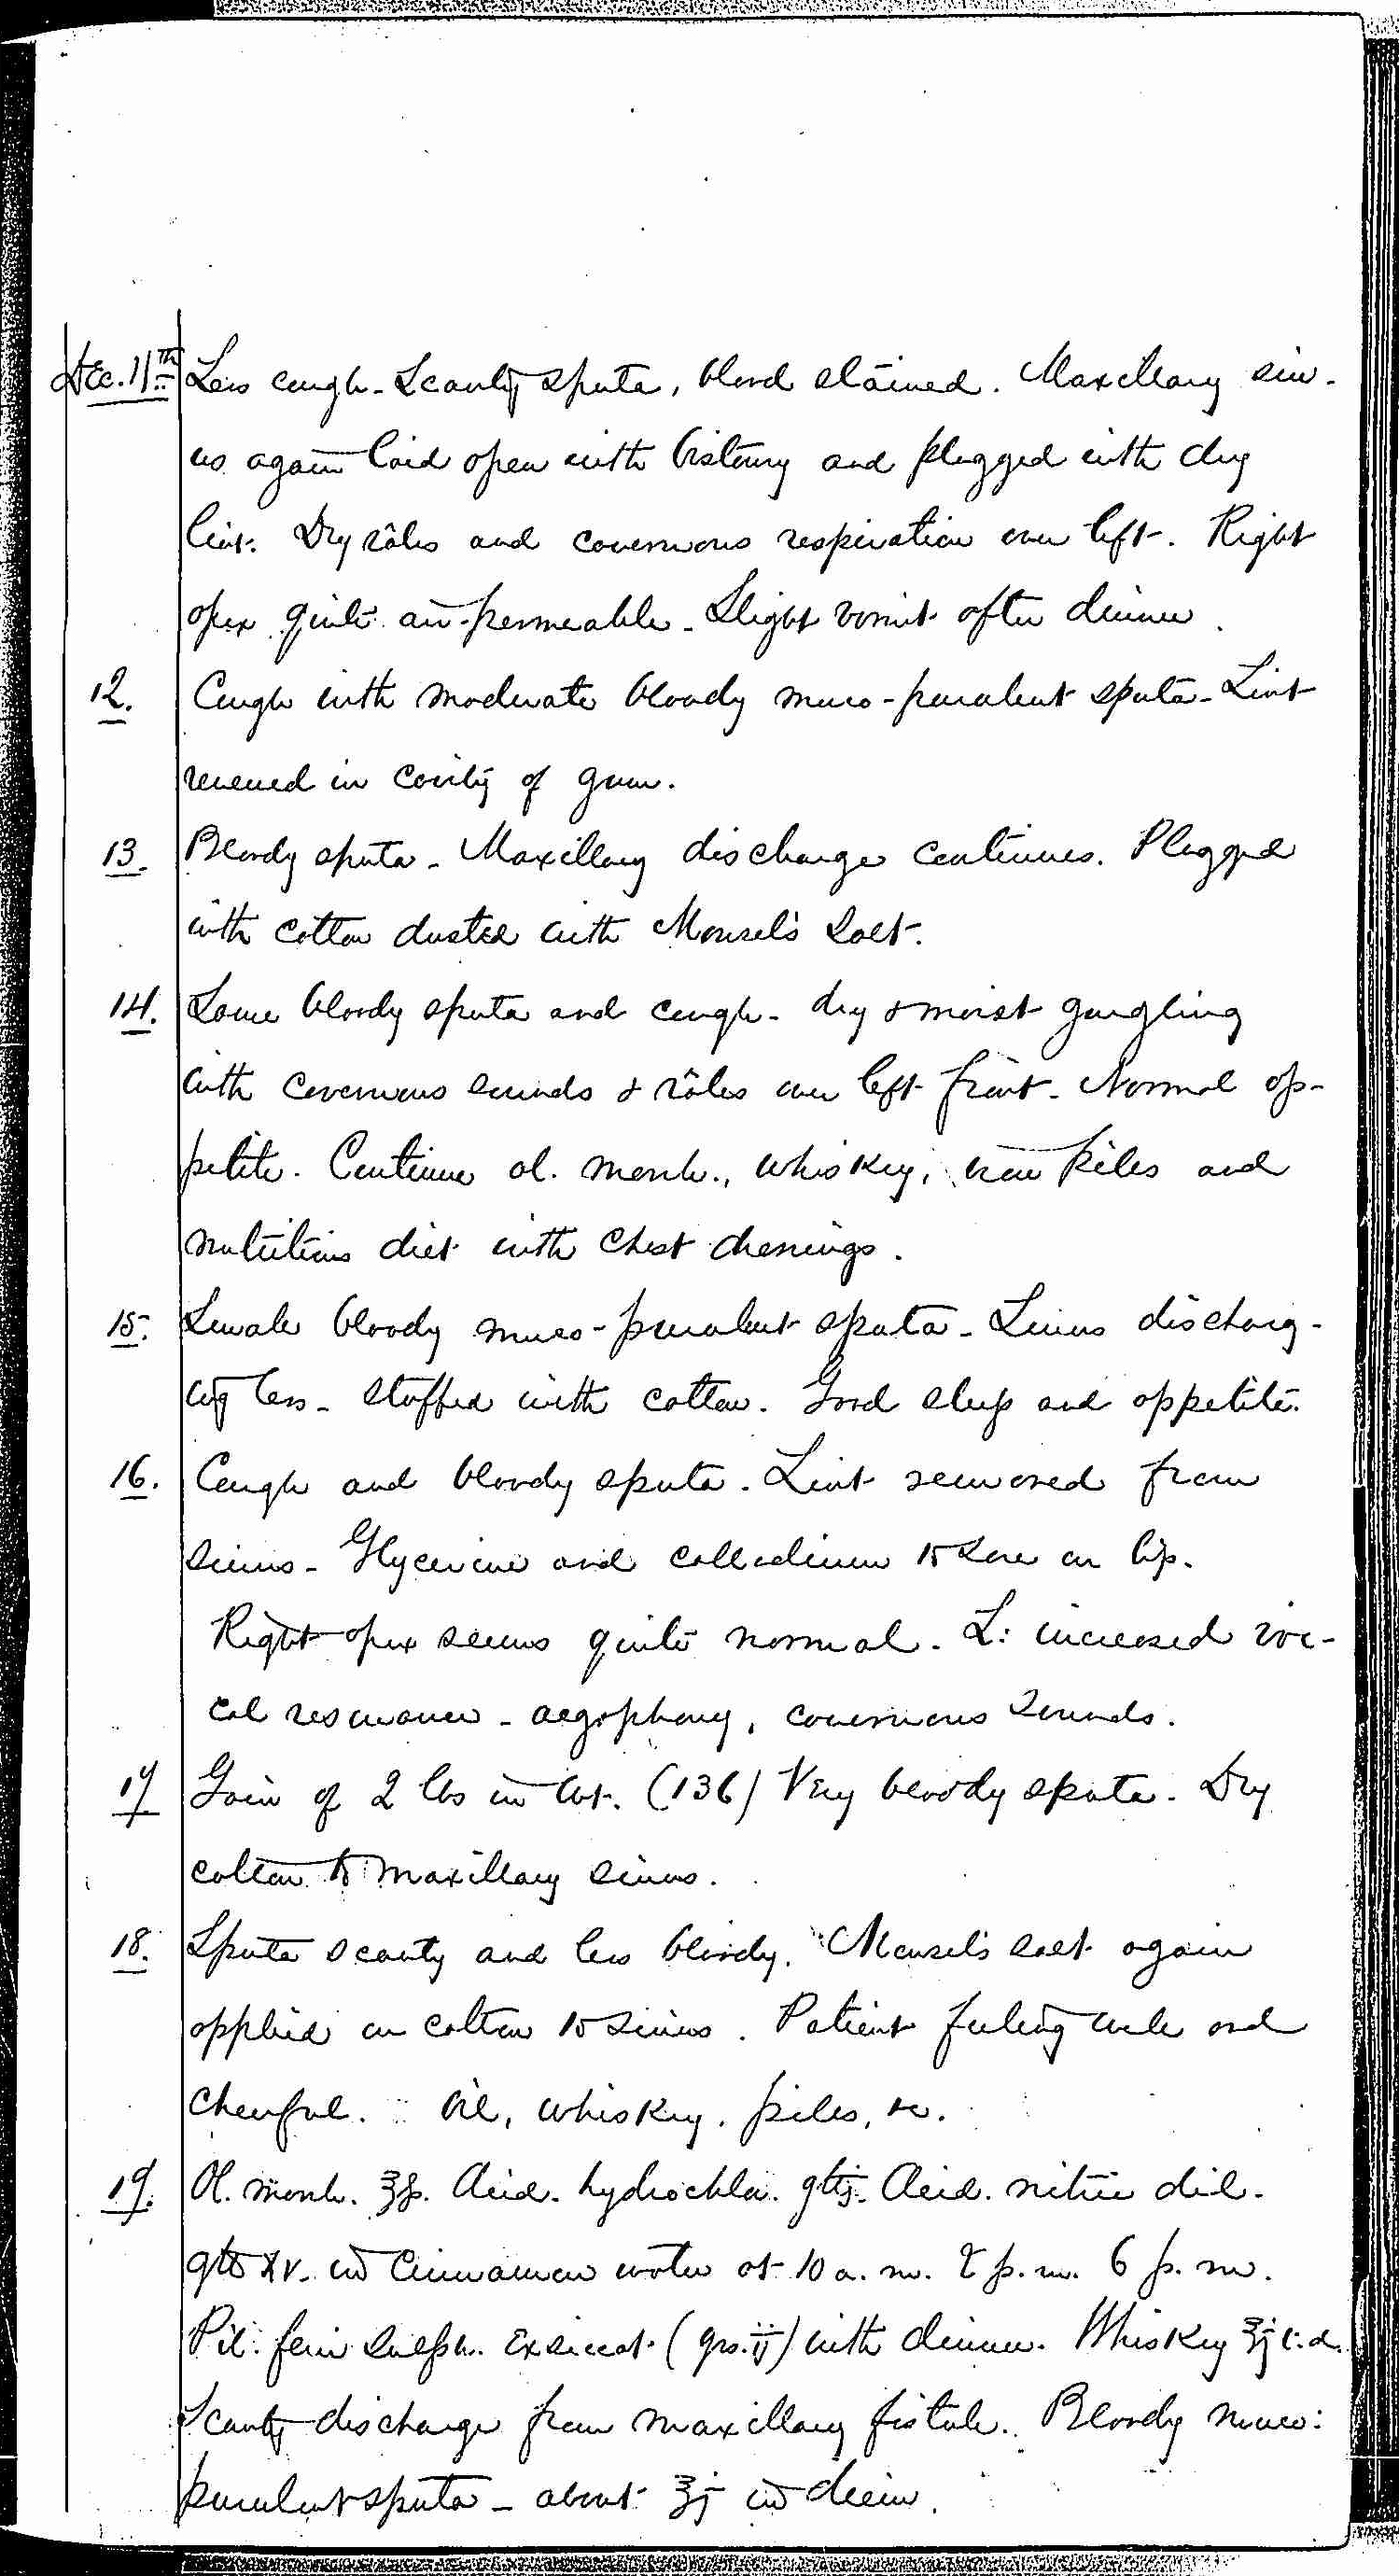 Entry for Bernard Drury (page 21 of 31) in the log Hospital Tickets and Case Papers - Naval Hospital - Washington, D.C. - 1868-69